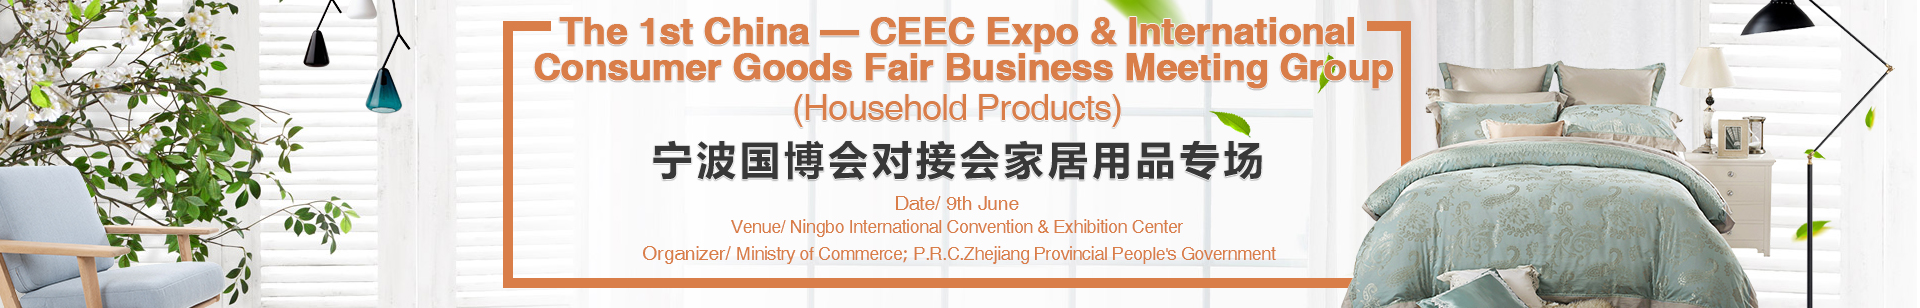  CEEC Expo Business Meeting Group (Household Products)